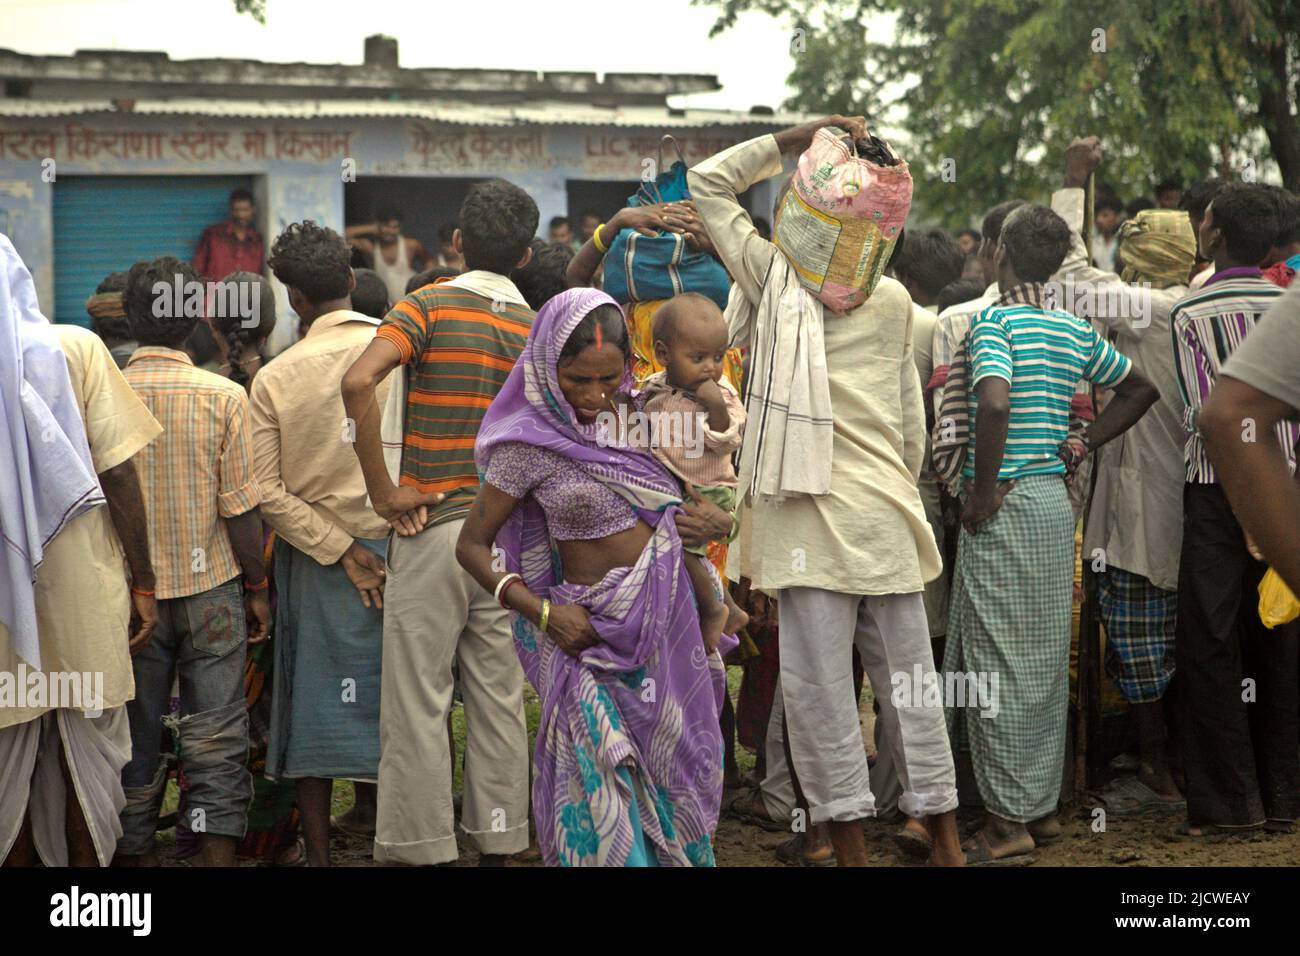 A woman carrying a baby as she is standing in the back of a crowd of people watching an acrobatic, gymnastic stunt performance on the side of the a road on the outskirts of Rajgir in Bihar, India. The India government's Sample Registration System (SRS) reported that the country's Infant Mortality Rate (IMR) was 20 in 2020, meaning that out of 1,000 babies born in the country, 20 die within 12 months of their births, according to the country's statistics quoted by Neeta Lal, a Delhi-based editor and journalist in a feature reporting published by The Diplomat on June 15, 2022. Stock Photo